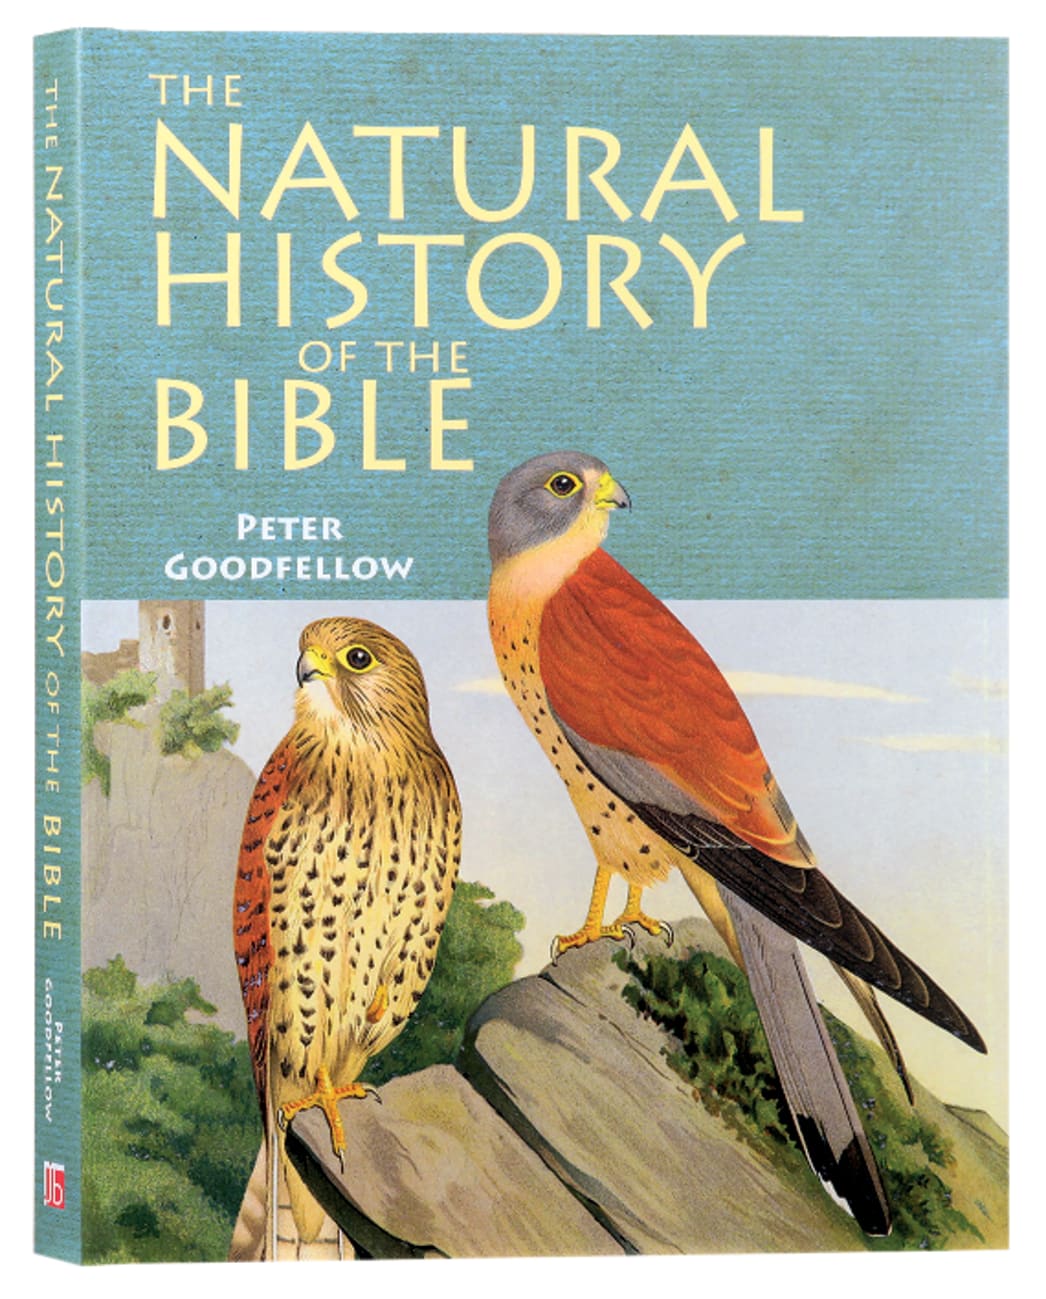 The Natural History of the Bible: A Guide For Bible Readers and Naturalists Hardback